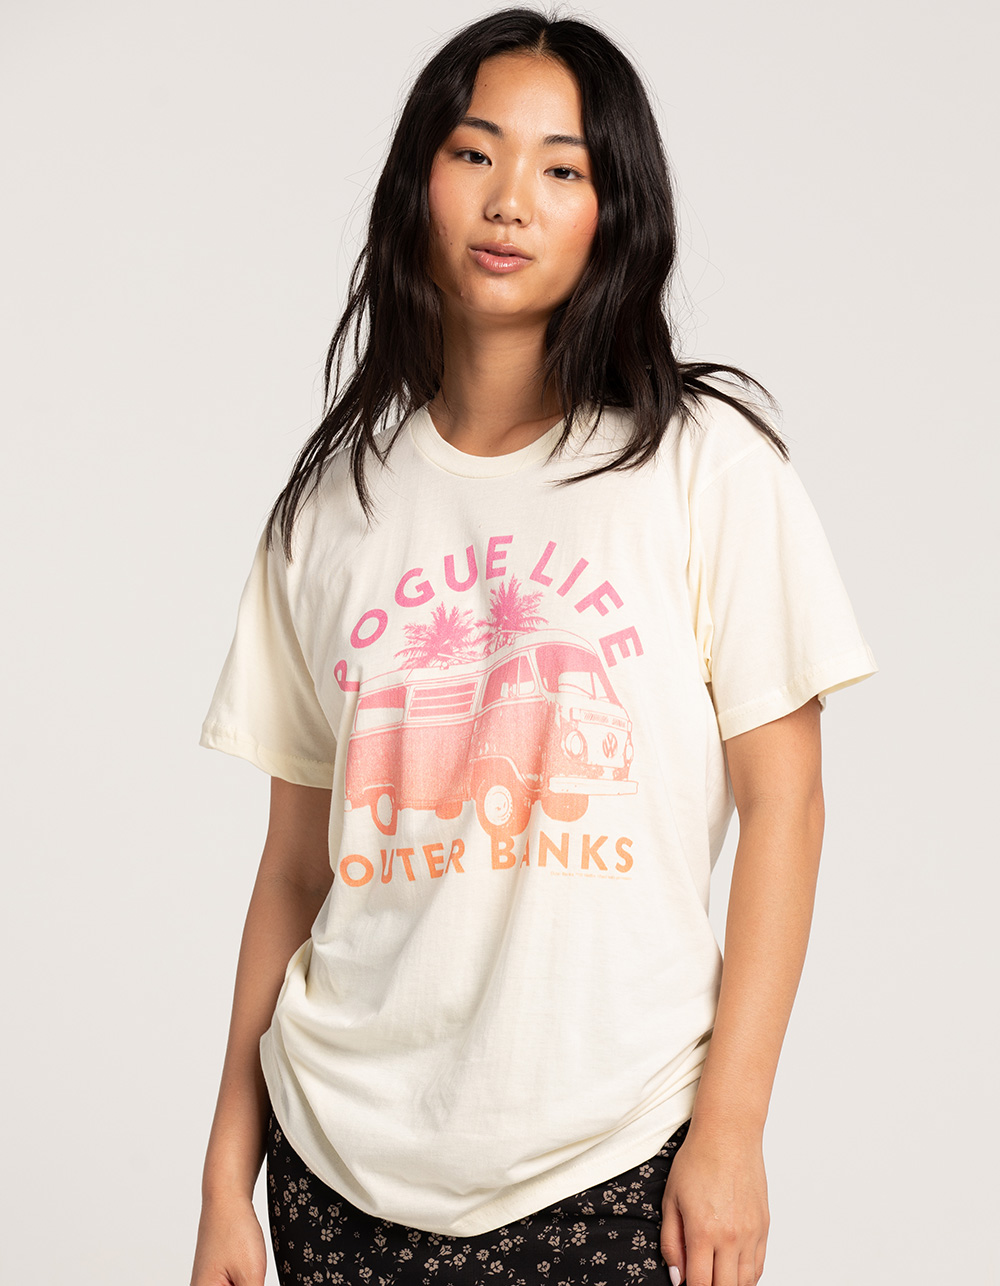 OUTER BANKS Pogue Life Unisex Tee - NATURAL | Tillys